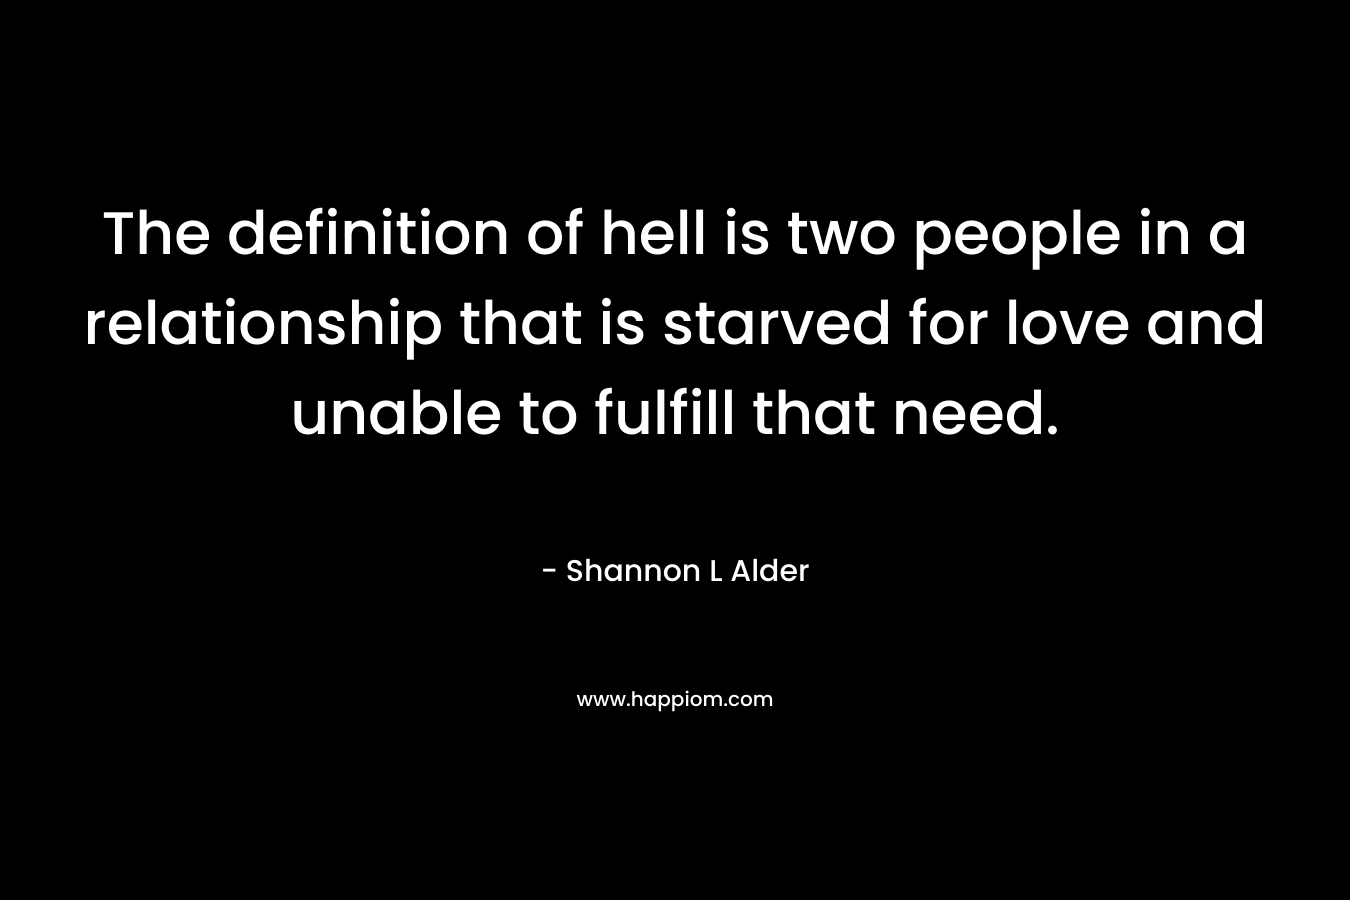 The definition of hell is two people in a relationship that is starved for love and unable to fulfill that need. – Shannon L Alder